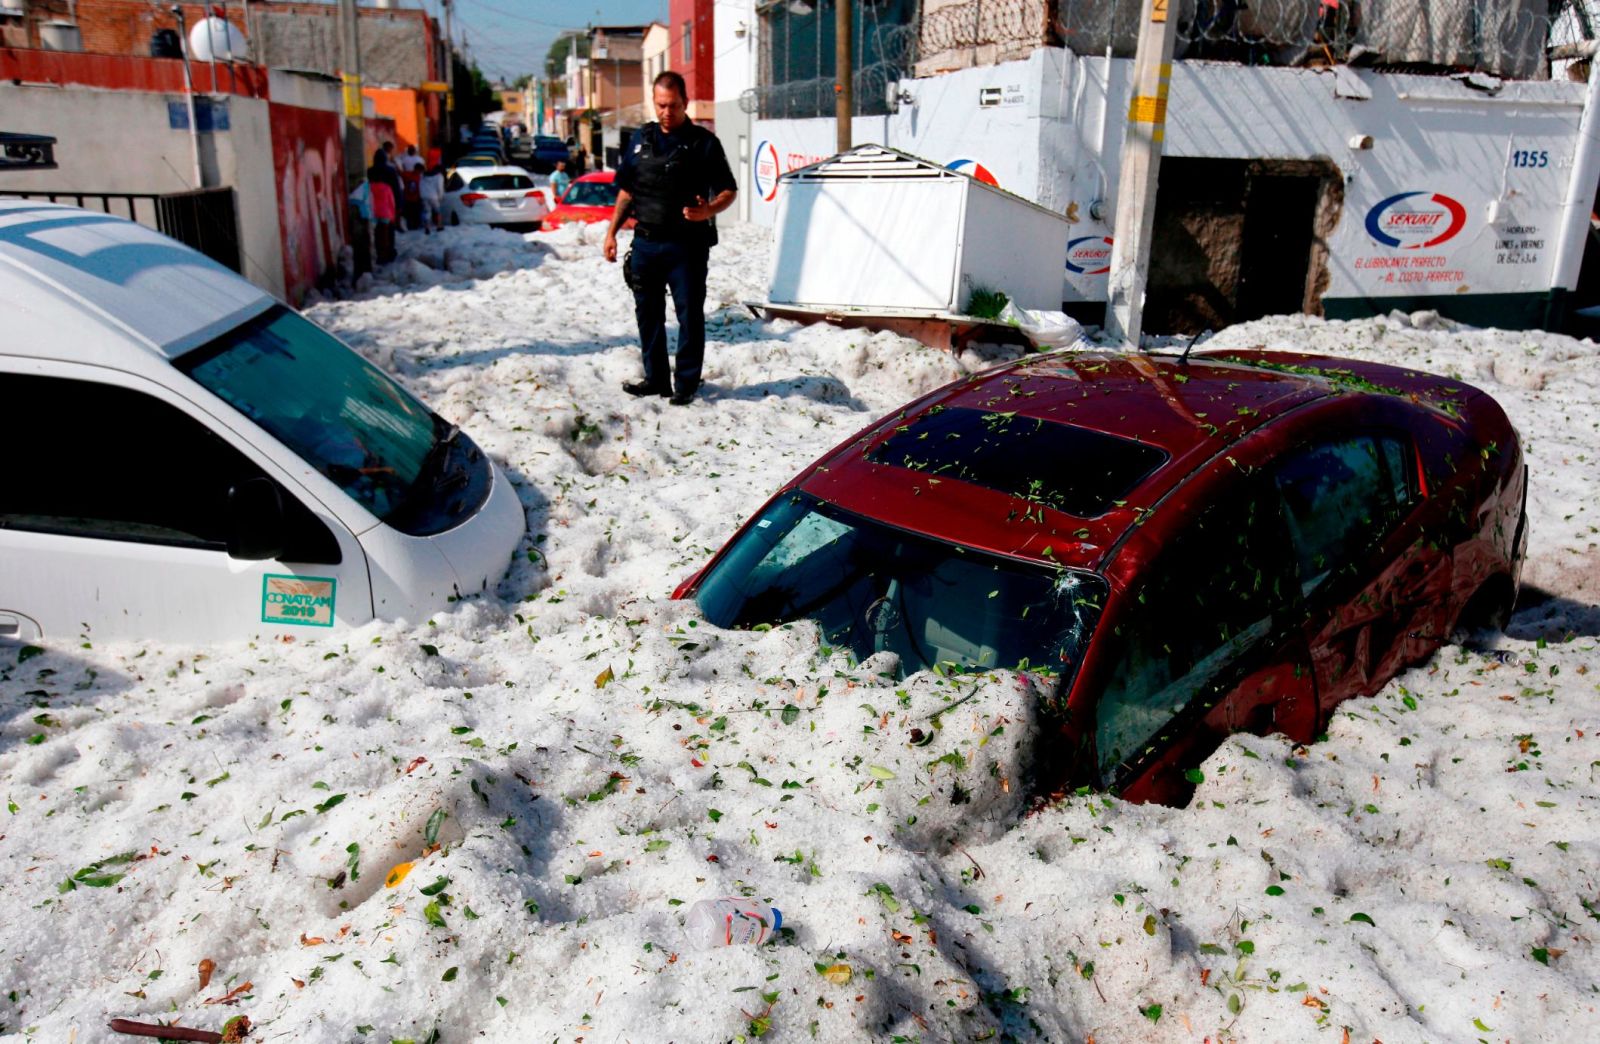 A policeman stands next to vehicles buried in hail in the eastern area of Guadalajara, Mexico, on 30 June 2019. Photo: Ulises Ruiz / AFP / Getty Images